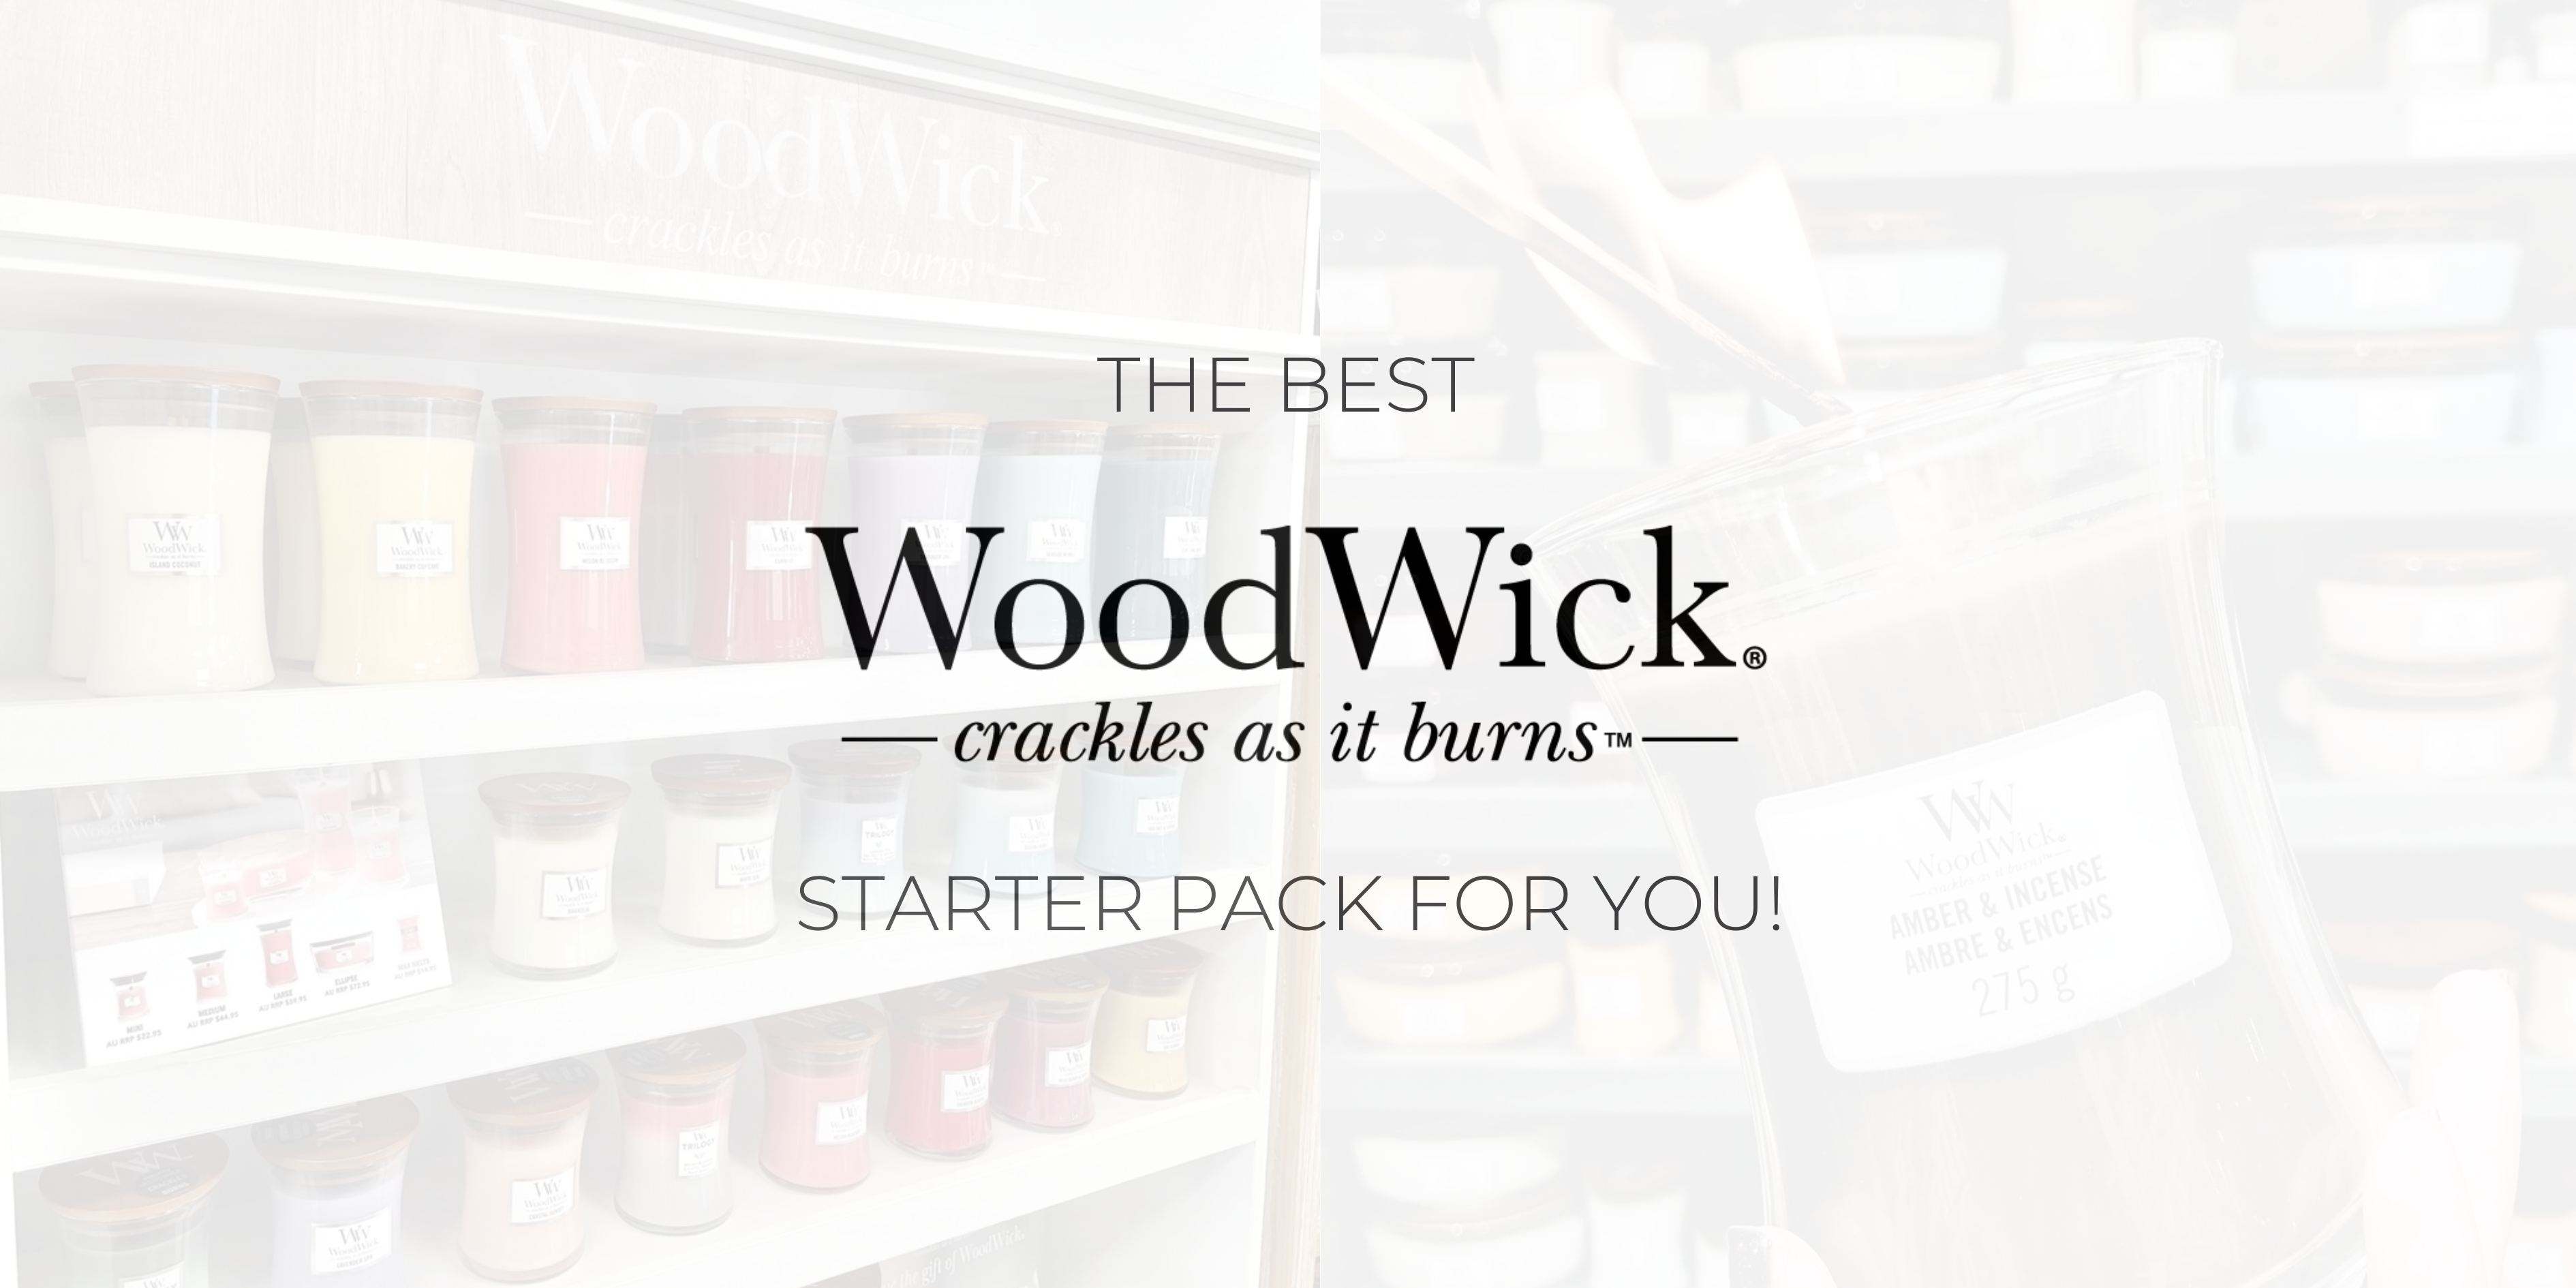 The Best WoodWick Starter Pack For You!